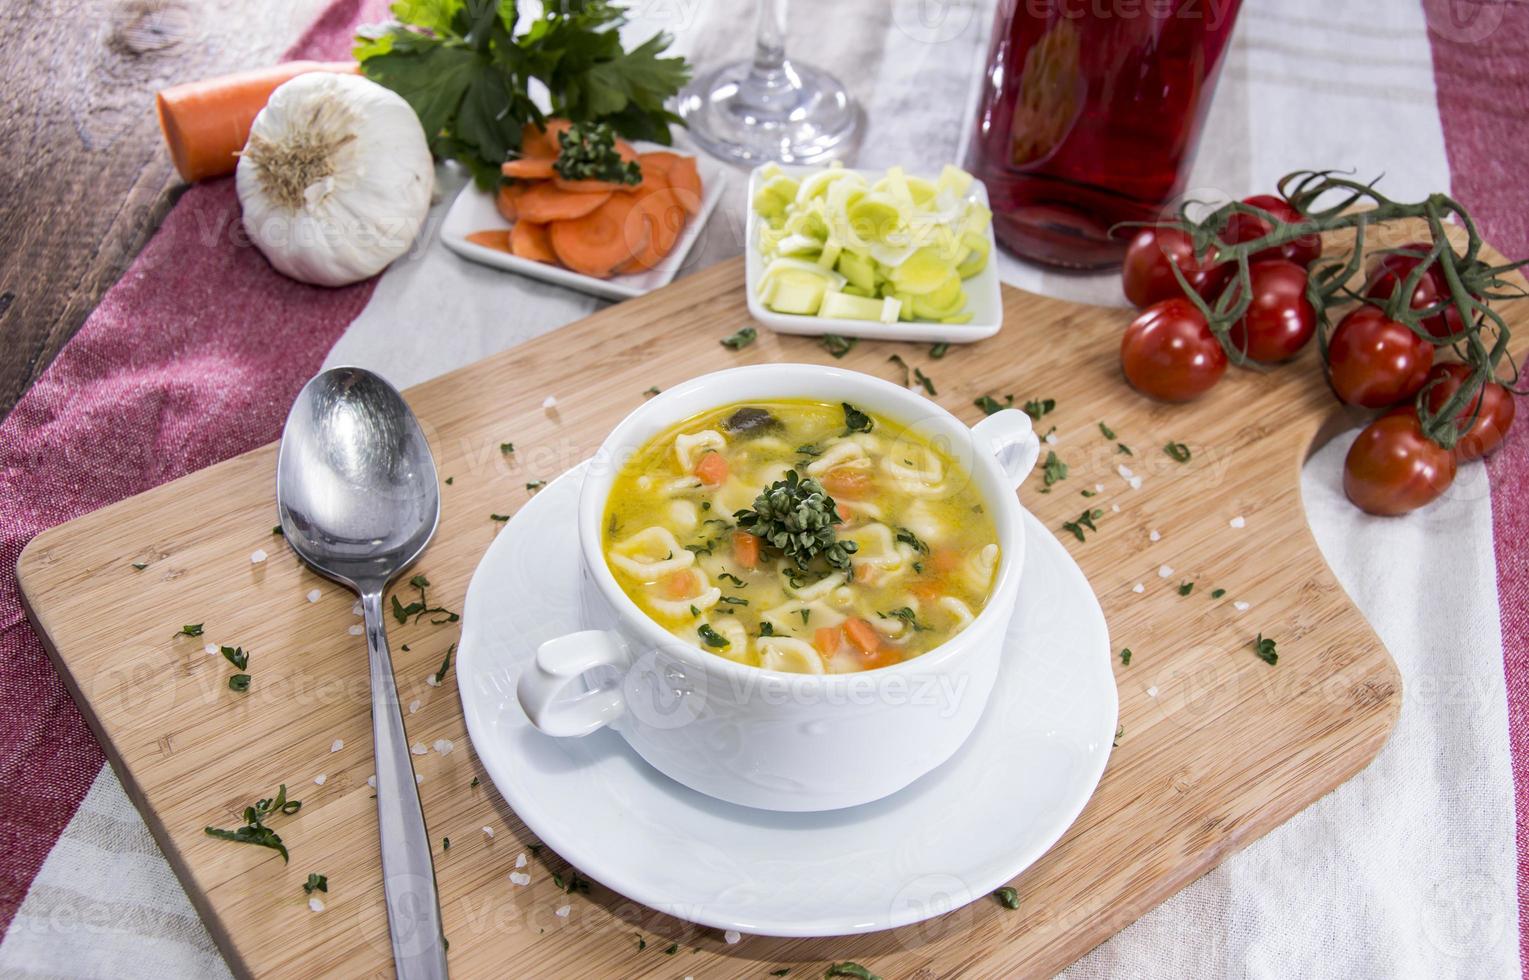 Portion of fresh made Soup photo